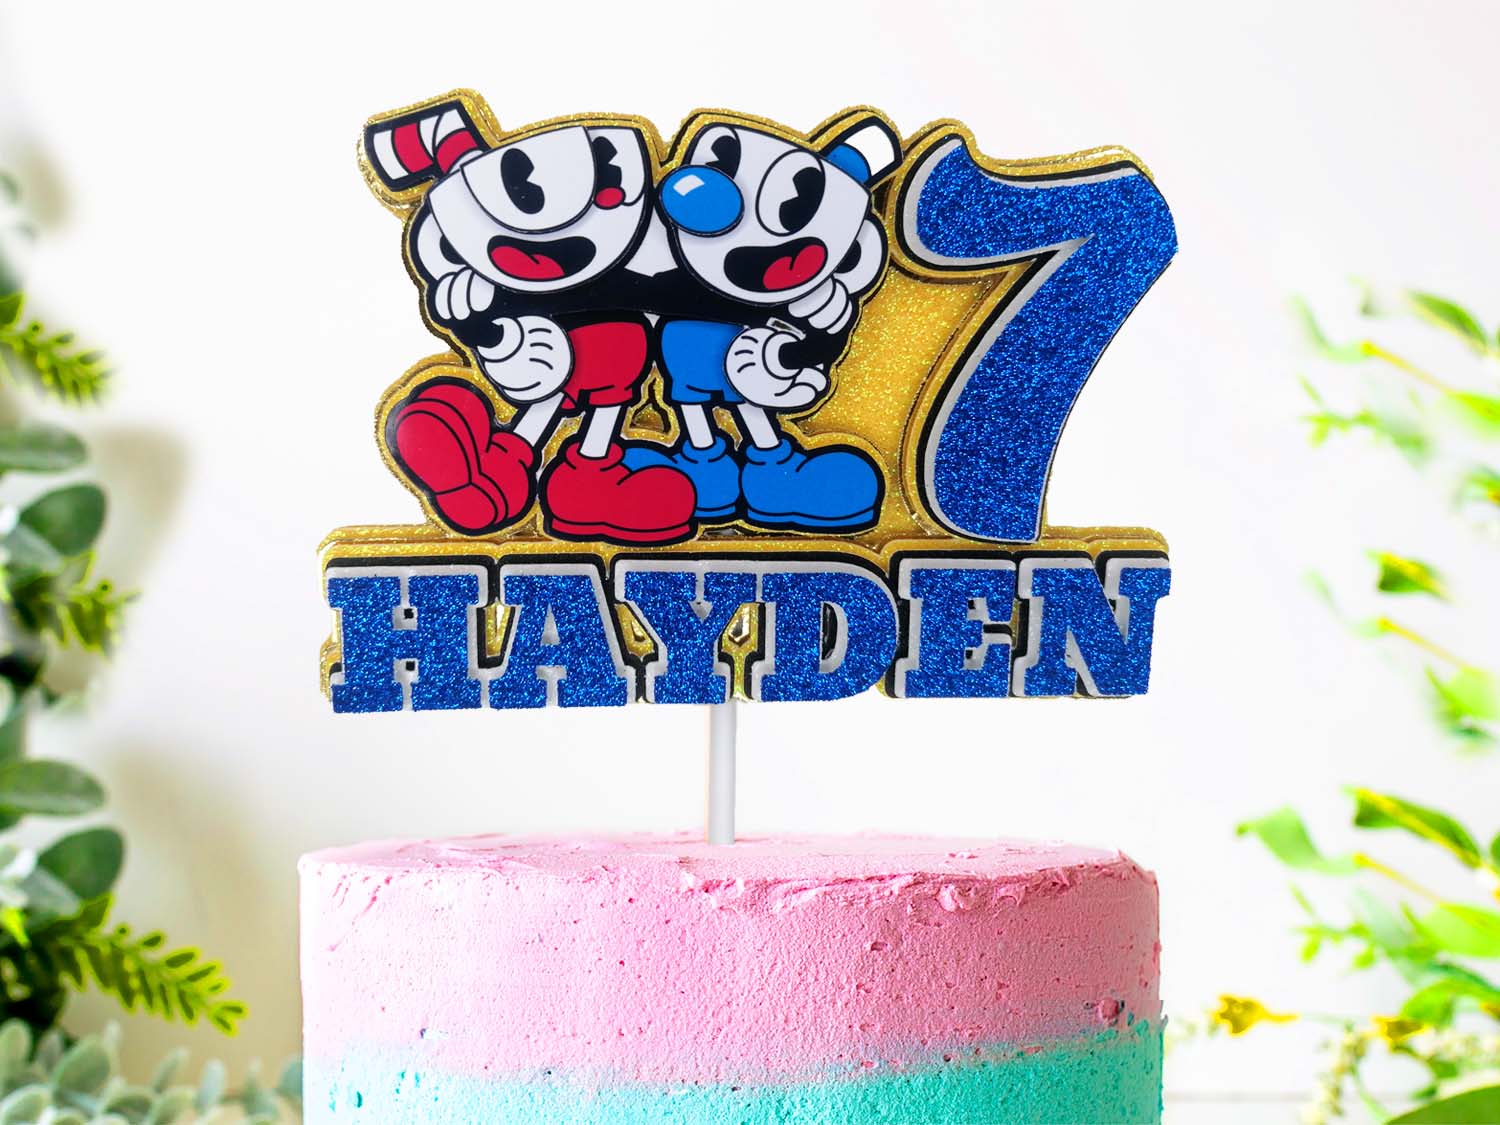 Stitch 3D Cake Topper - Free Delivery in Ireland